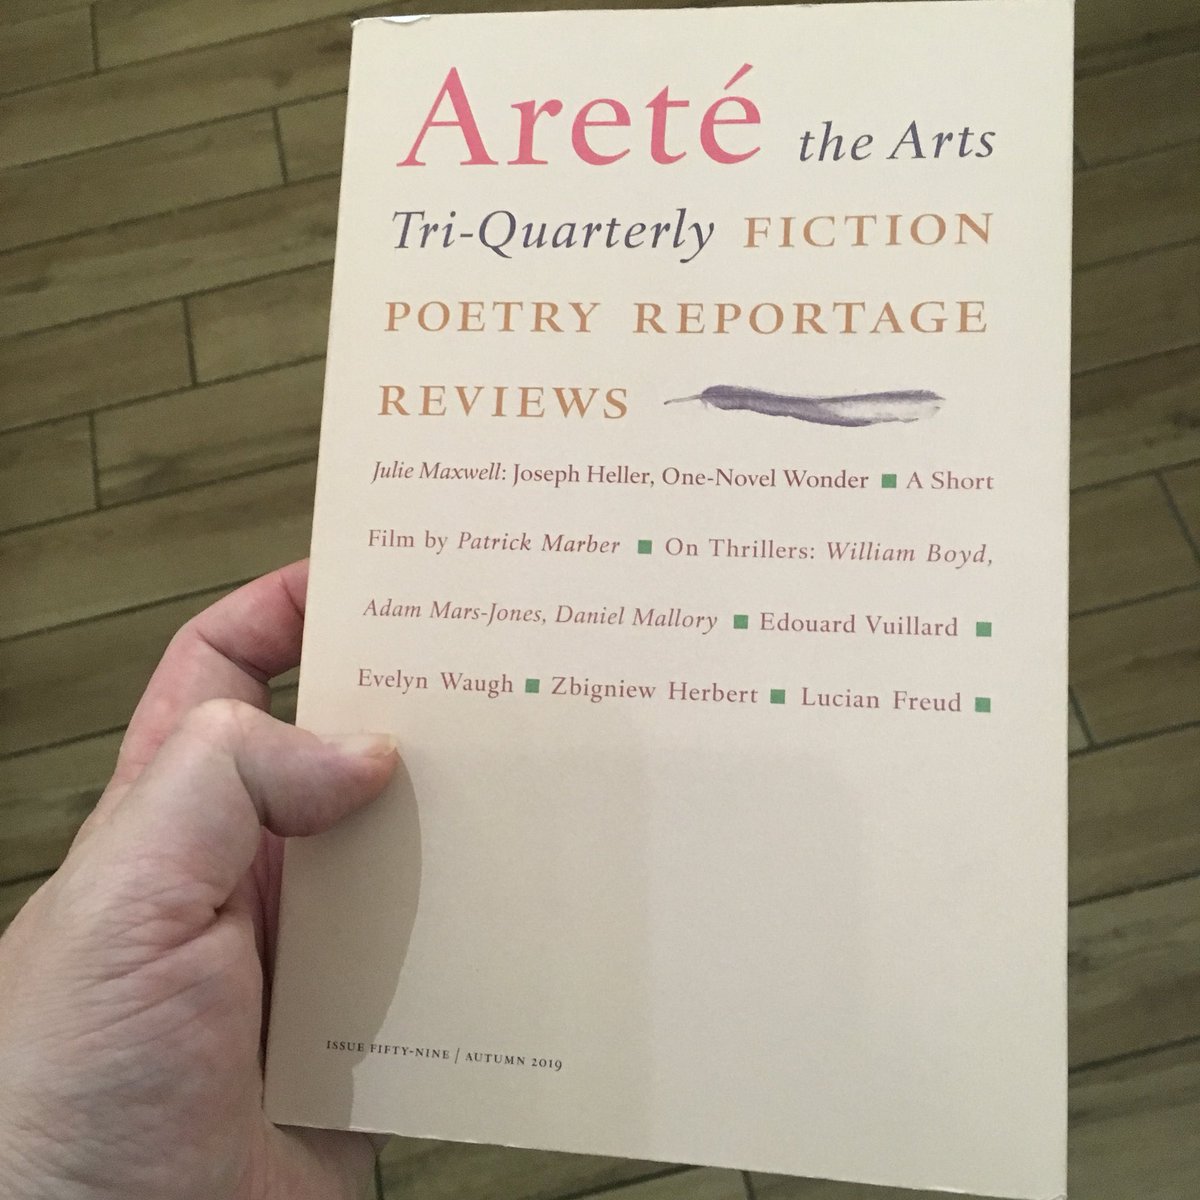 I guess I was thinking in particular of the hilarious pieces about me that have been appearing recently in Arete, Craig Raine's magazine, which I believe is supported by the college?  #NewCollegeReadsToYou